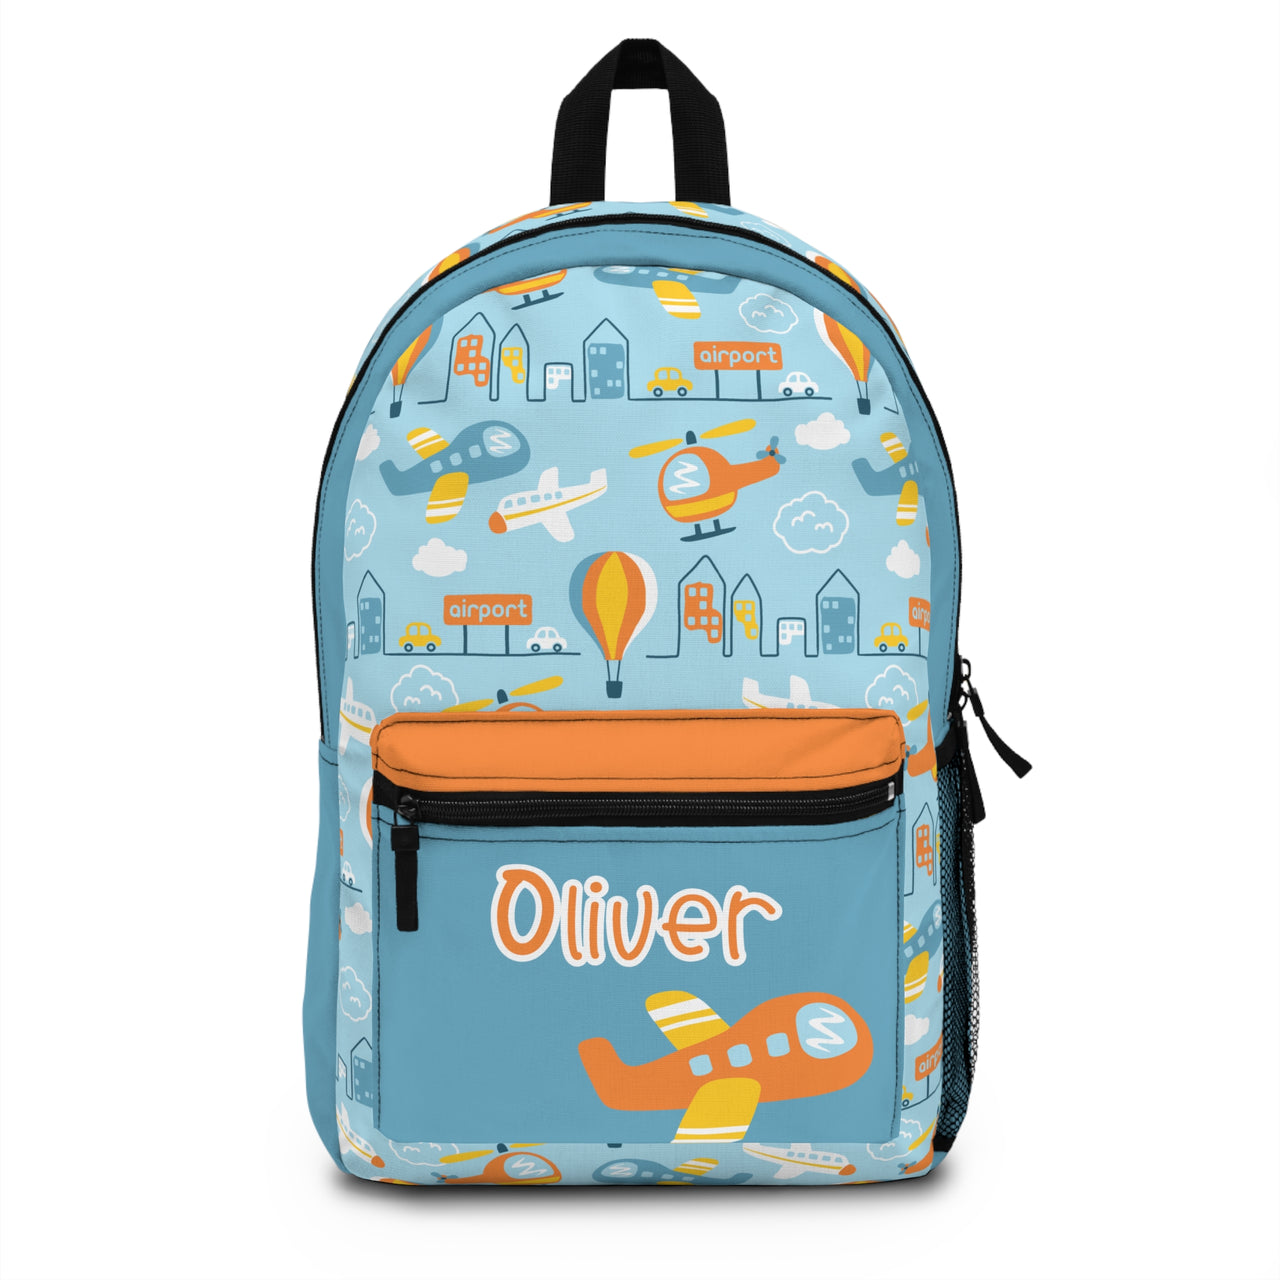 Personalized Aircraft Vehicles Boys School Backpack - CHILD DECOR LLC